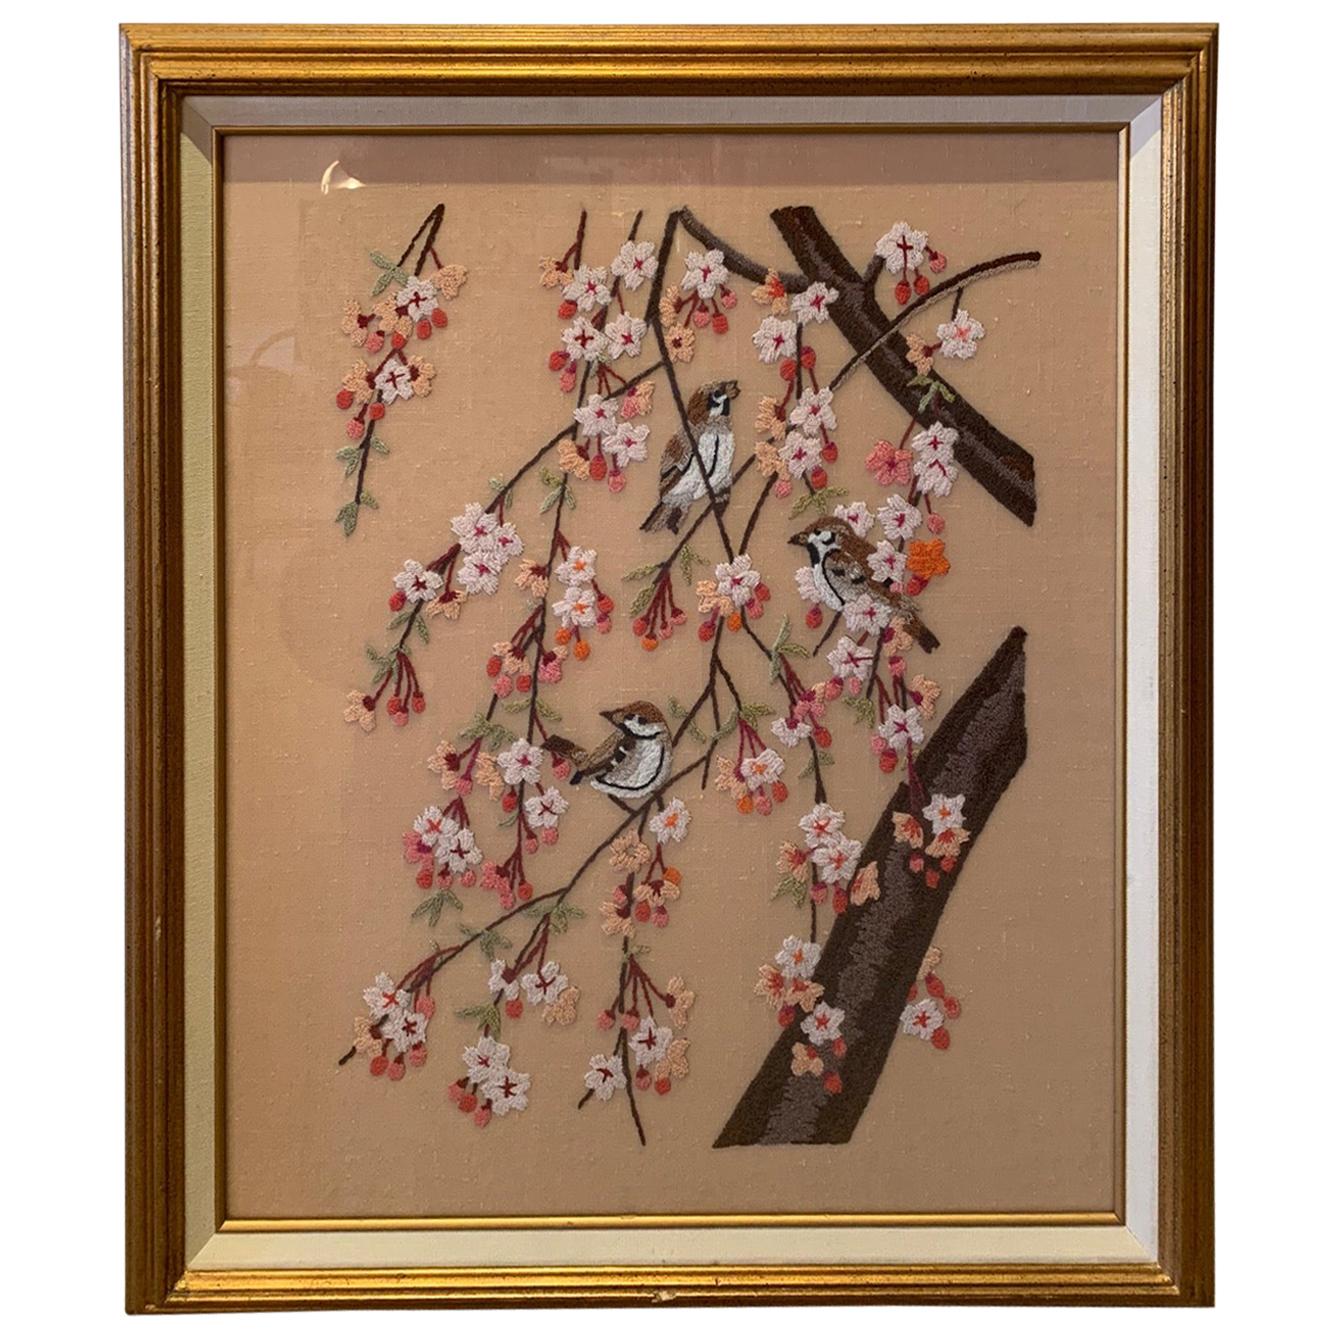 Pretty Vintage Framed Embroidery of Cherry Blossoms